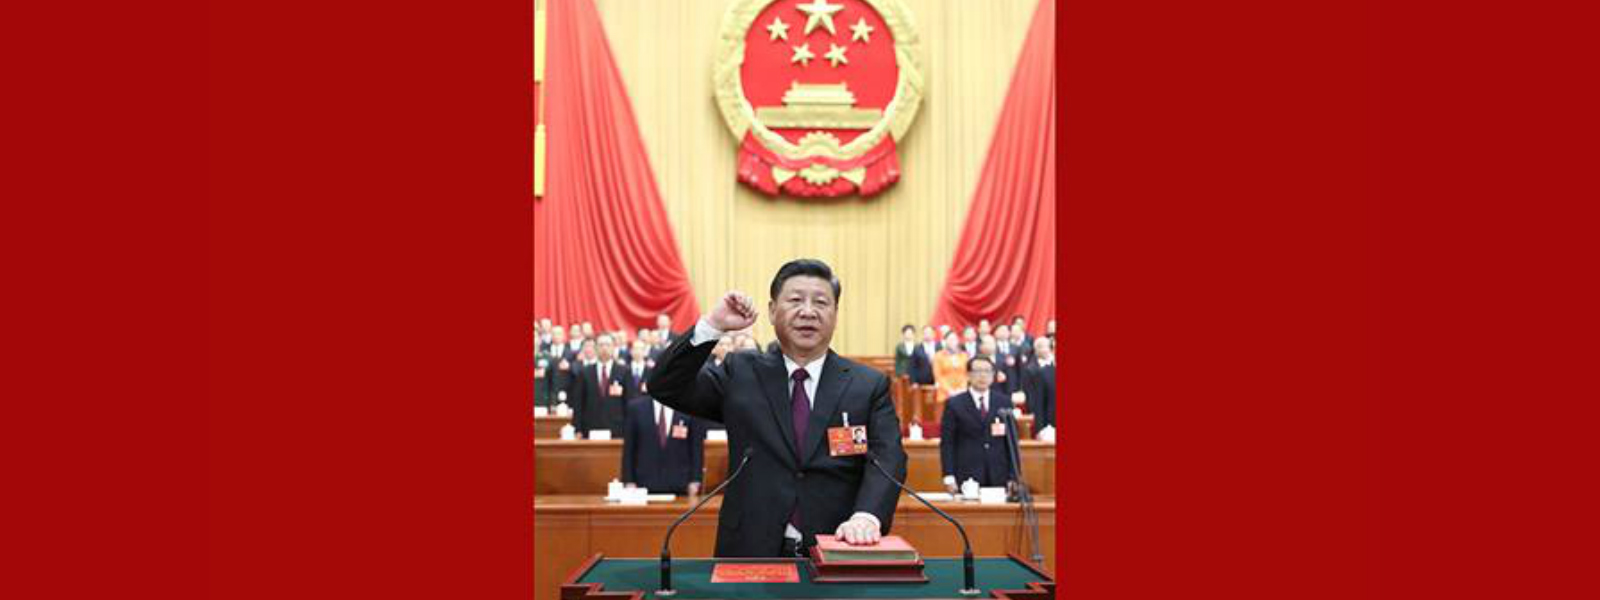 Xi Jinping starts new term as President of China